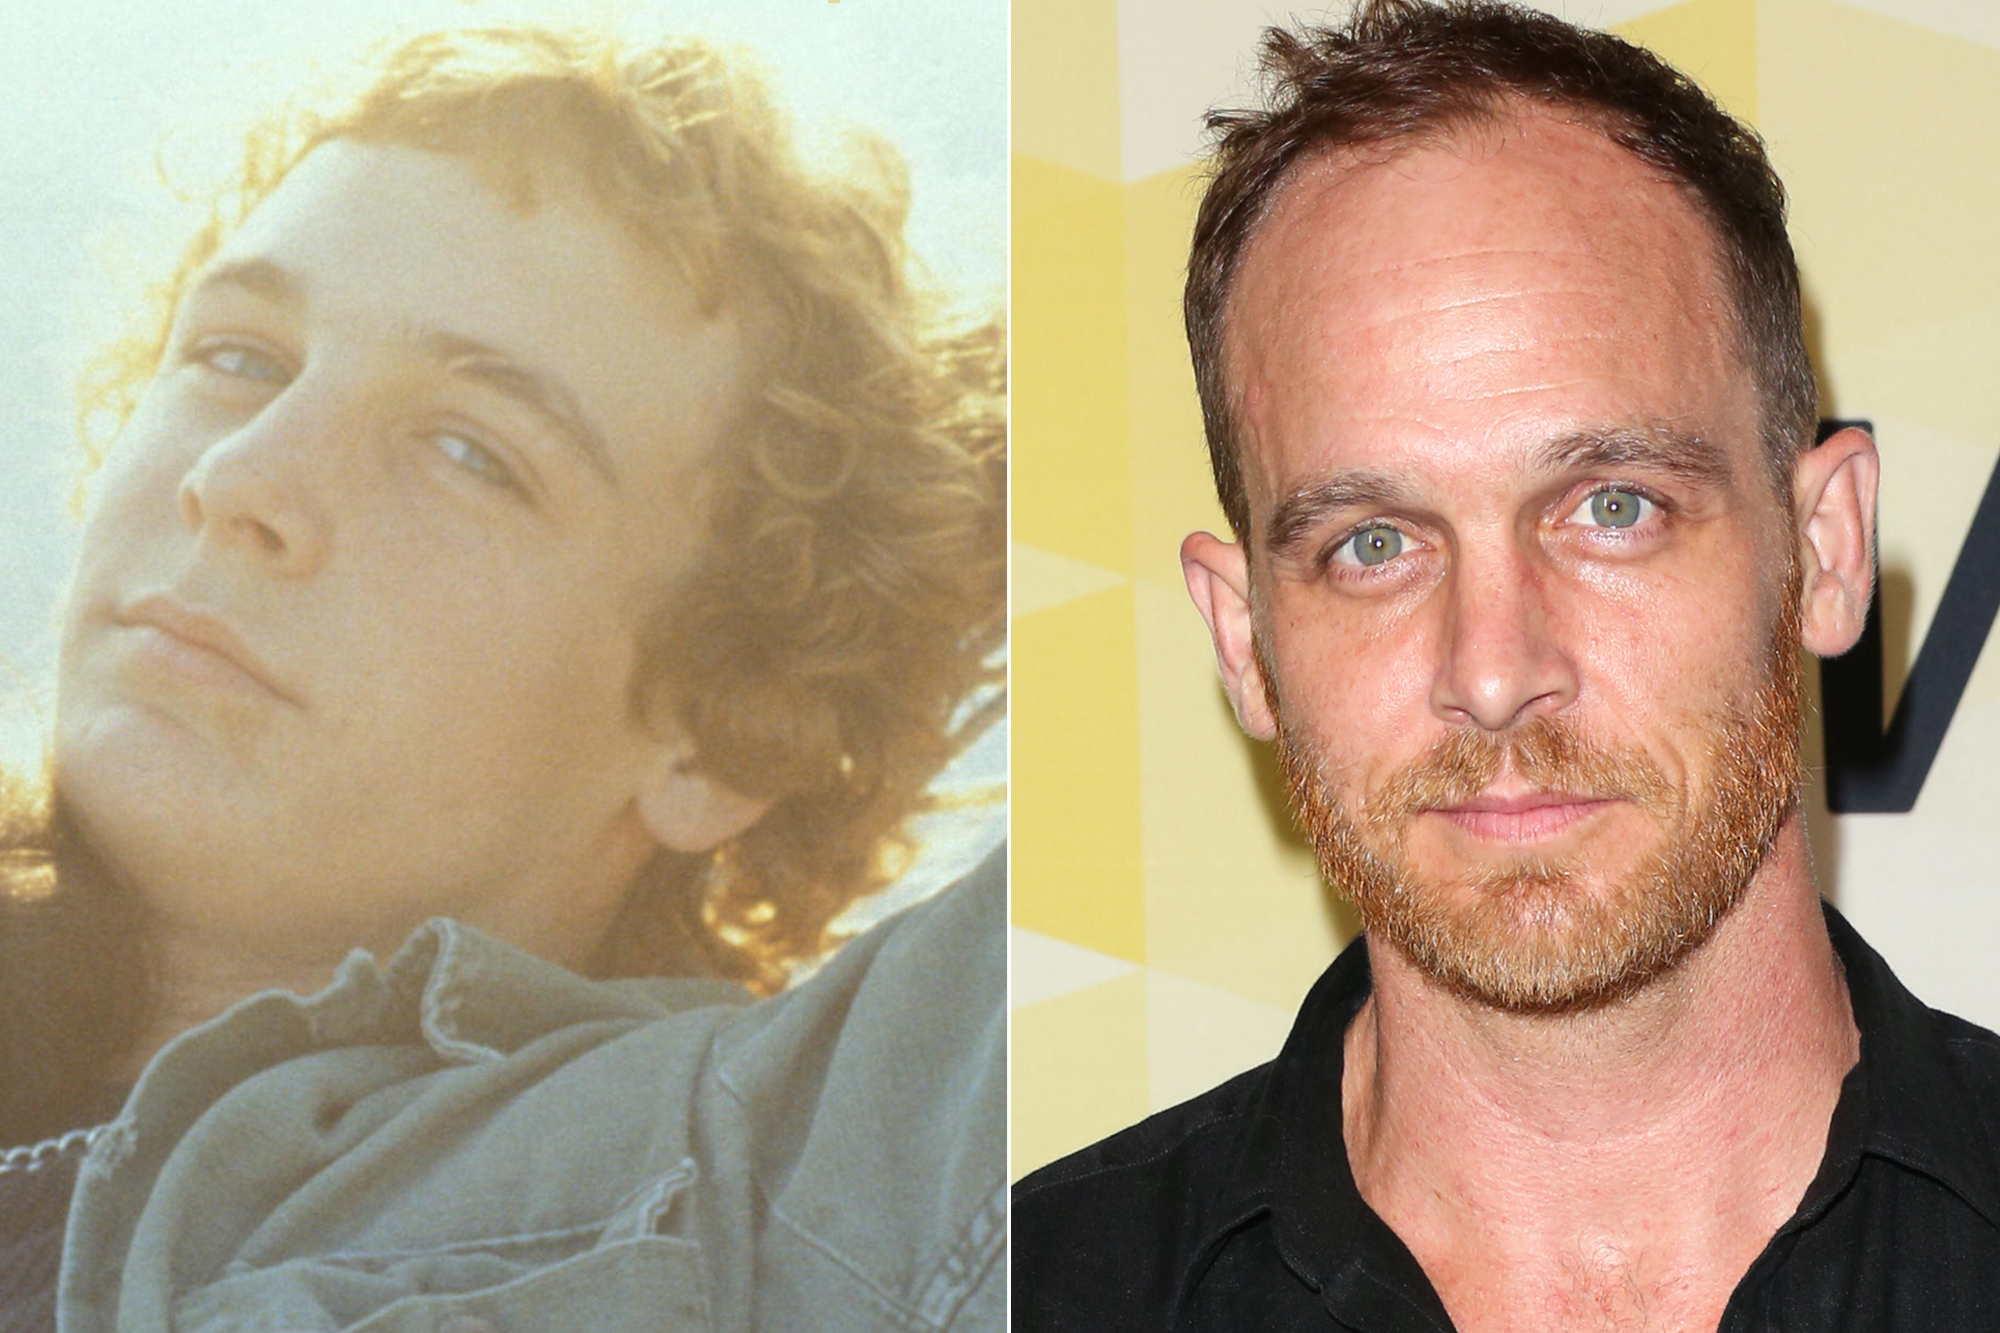 Ethan Embry, who played Mark in the film, has had starring roles on 'Brotherhood' and 'Once Upon a Time' and has appeared on 'The Walking Dead.' He currently appears in the Netflix series 'Grace and Frankie.'